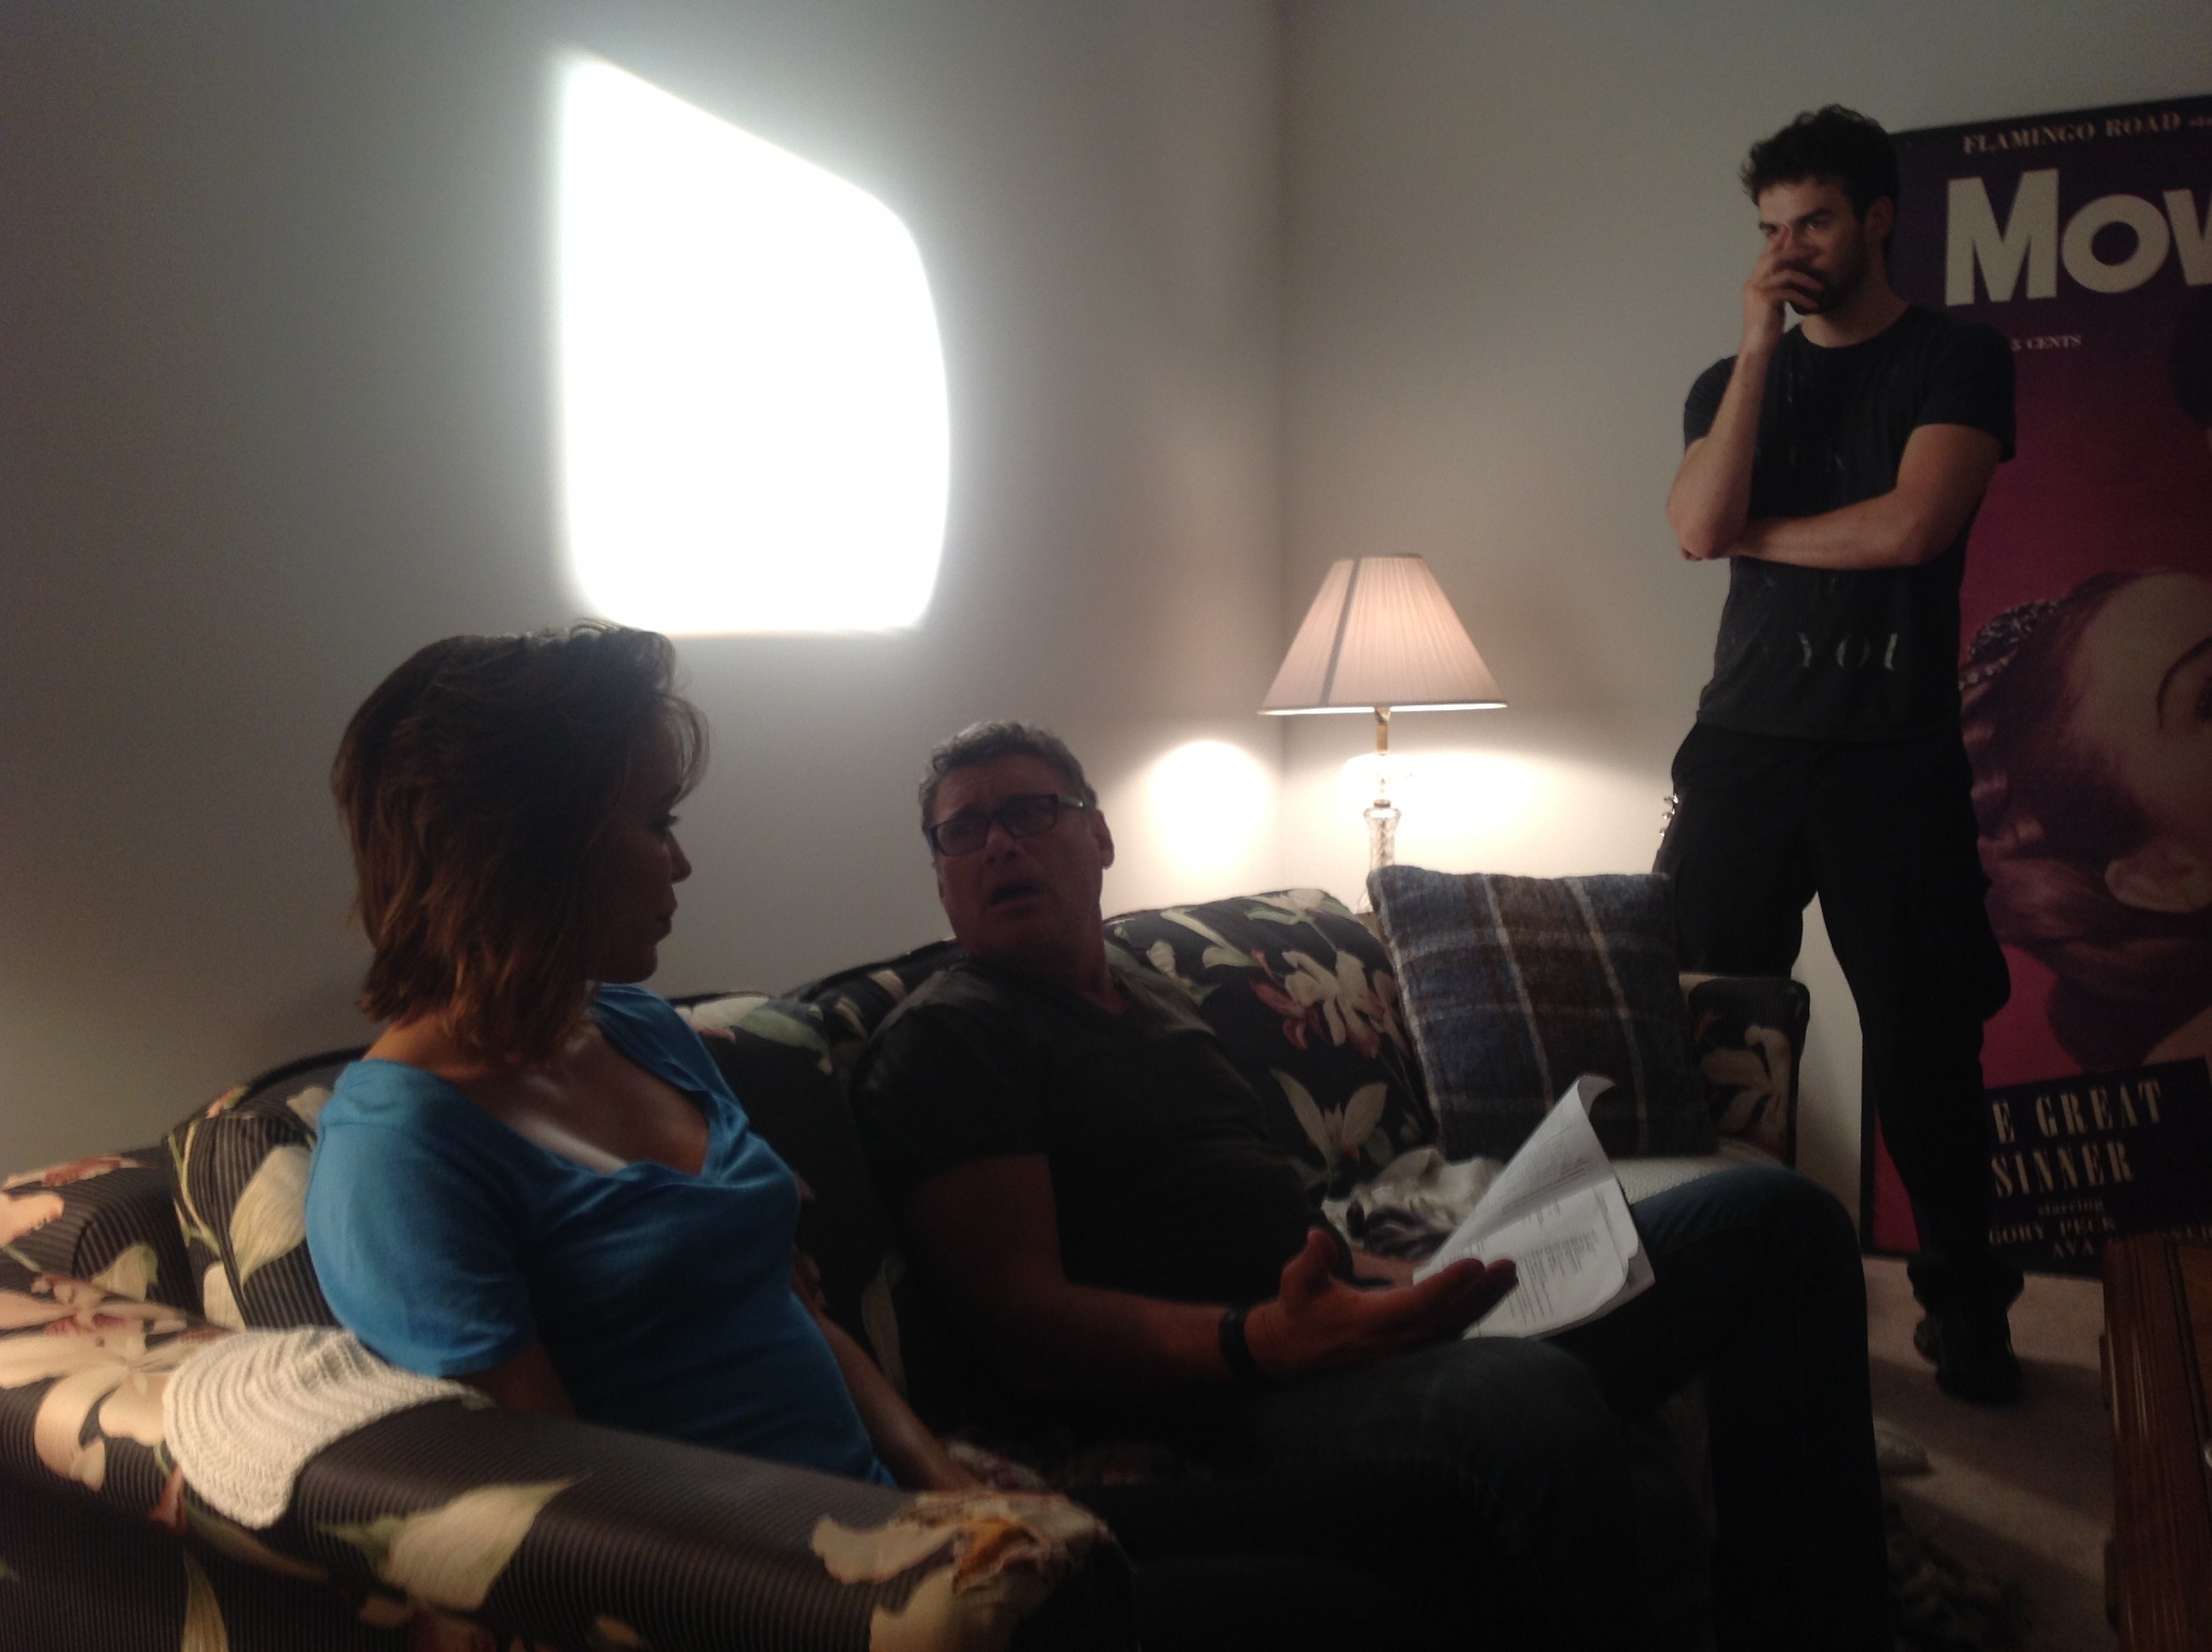 On the set with Steven Bauer